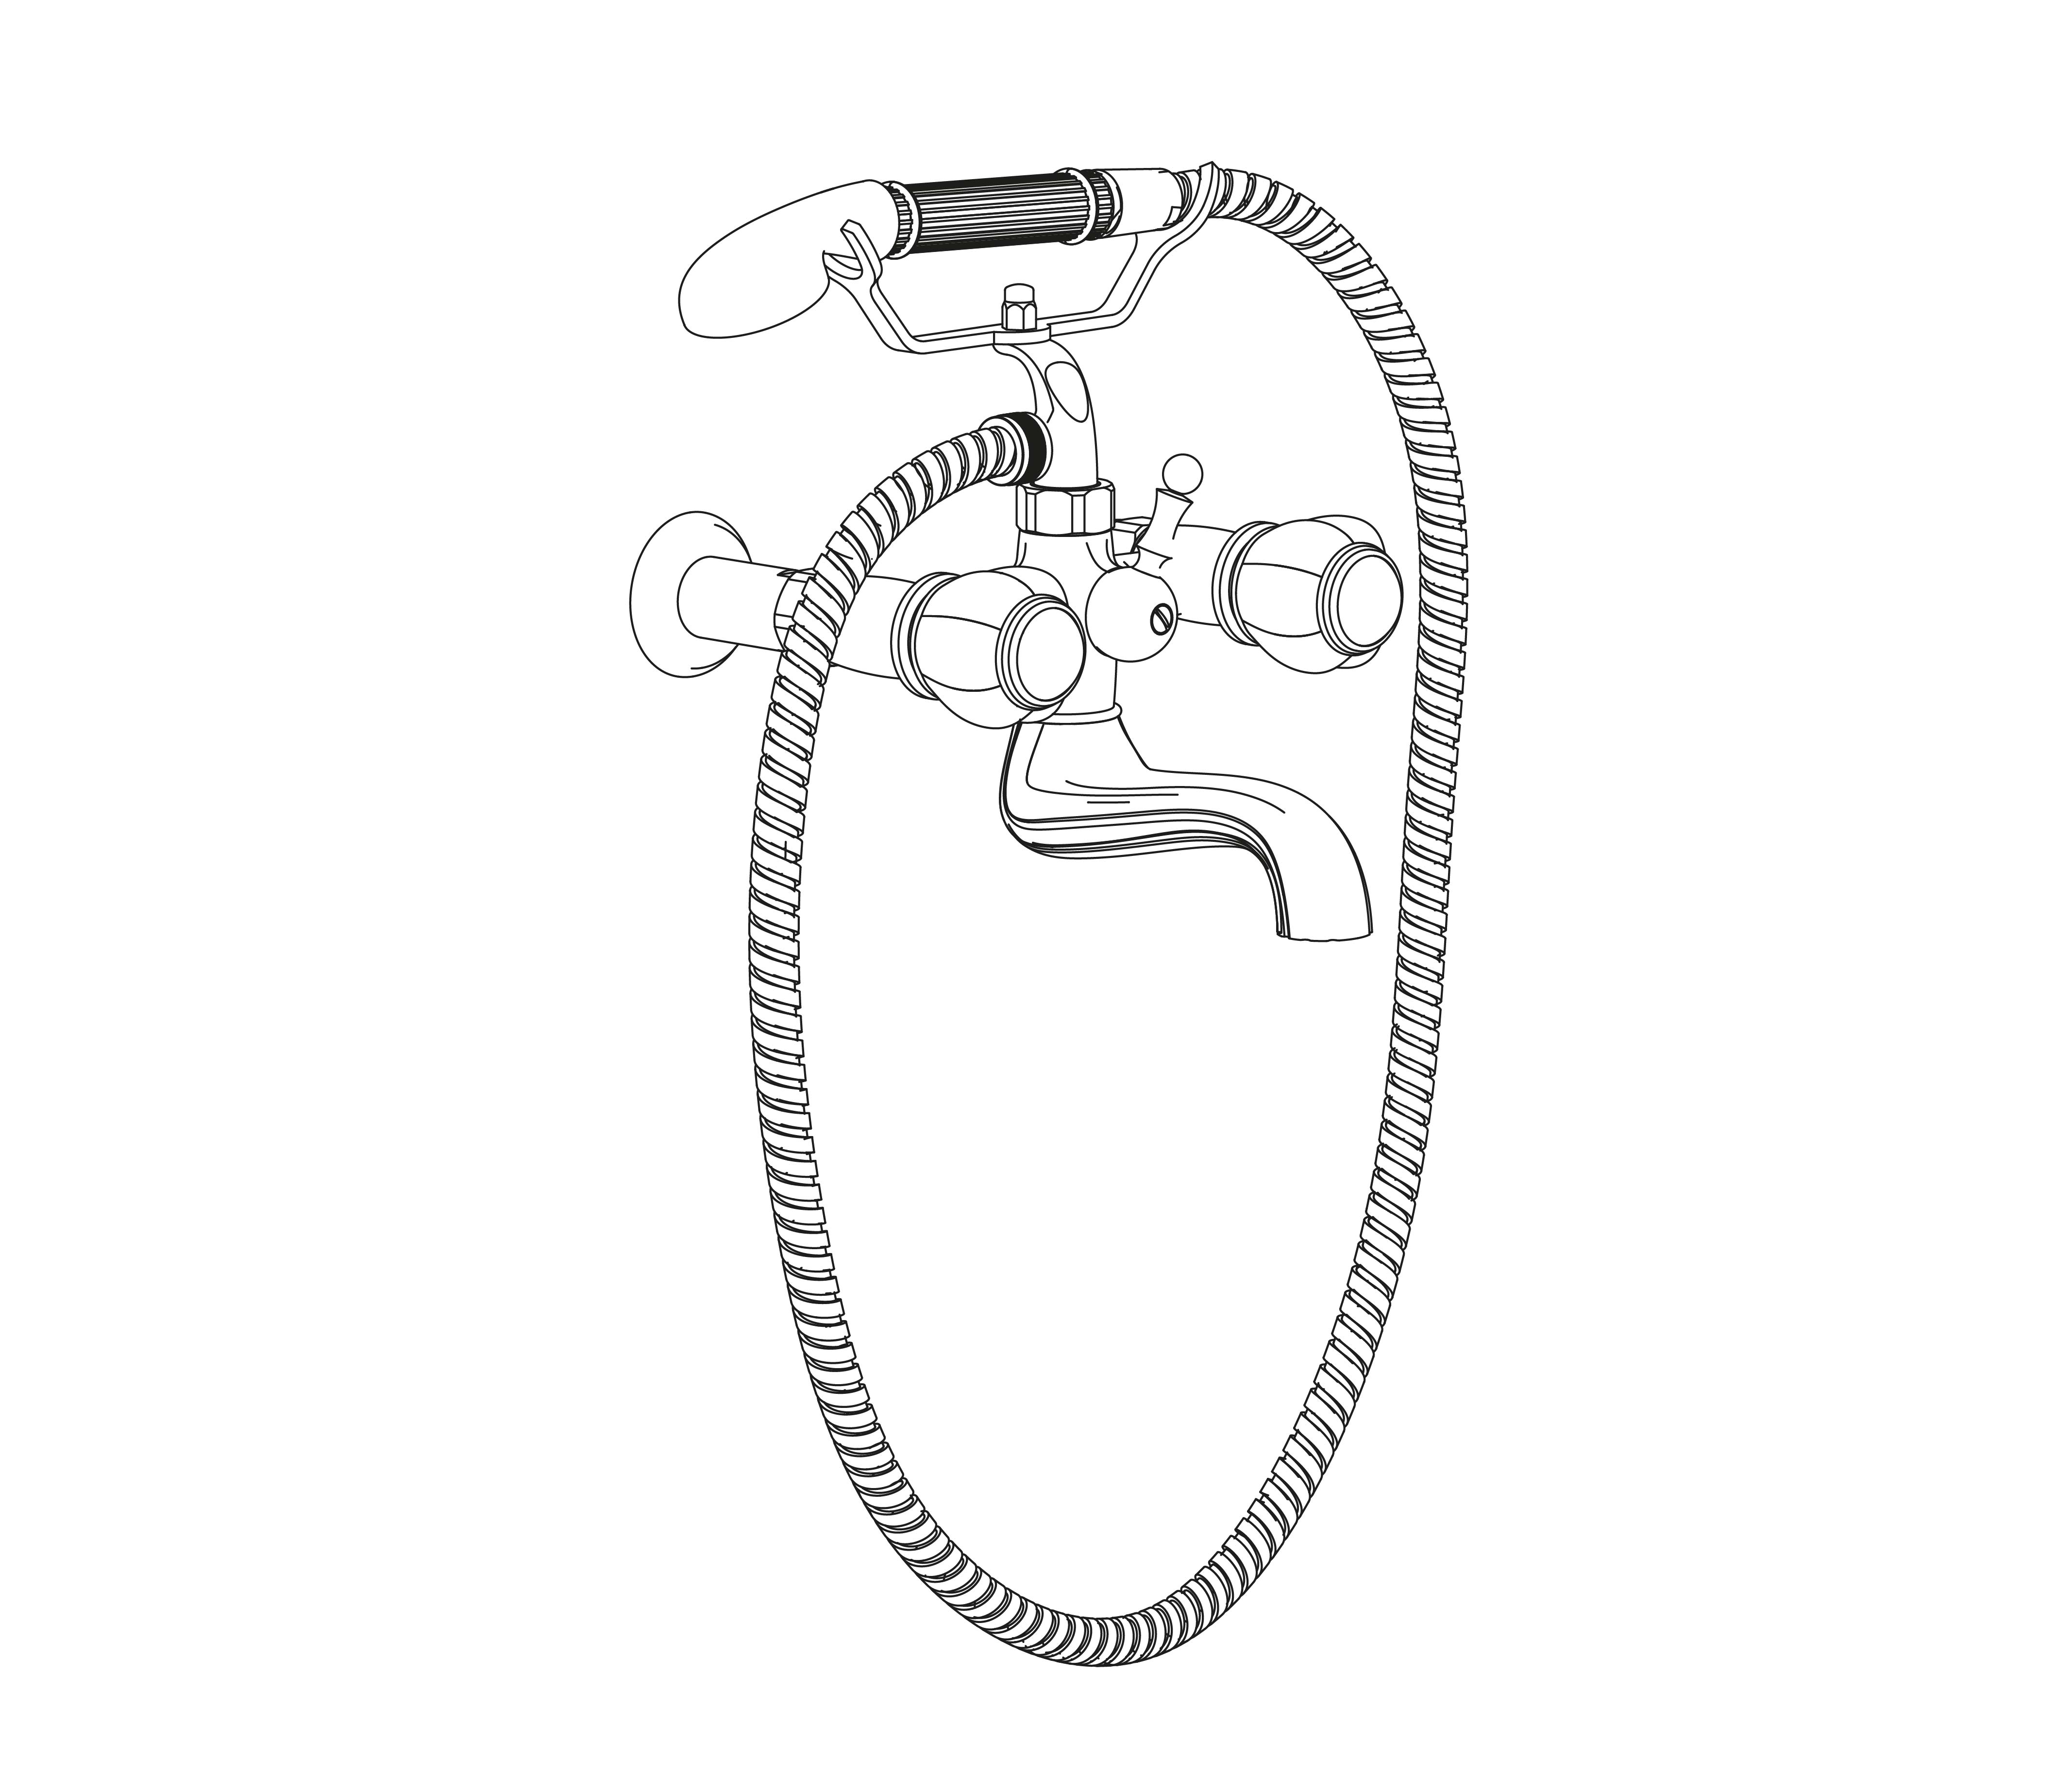 S152-3201 Wall mounted bath and shower mixer